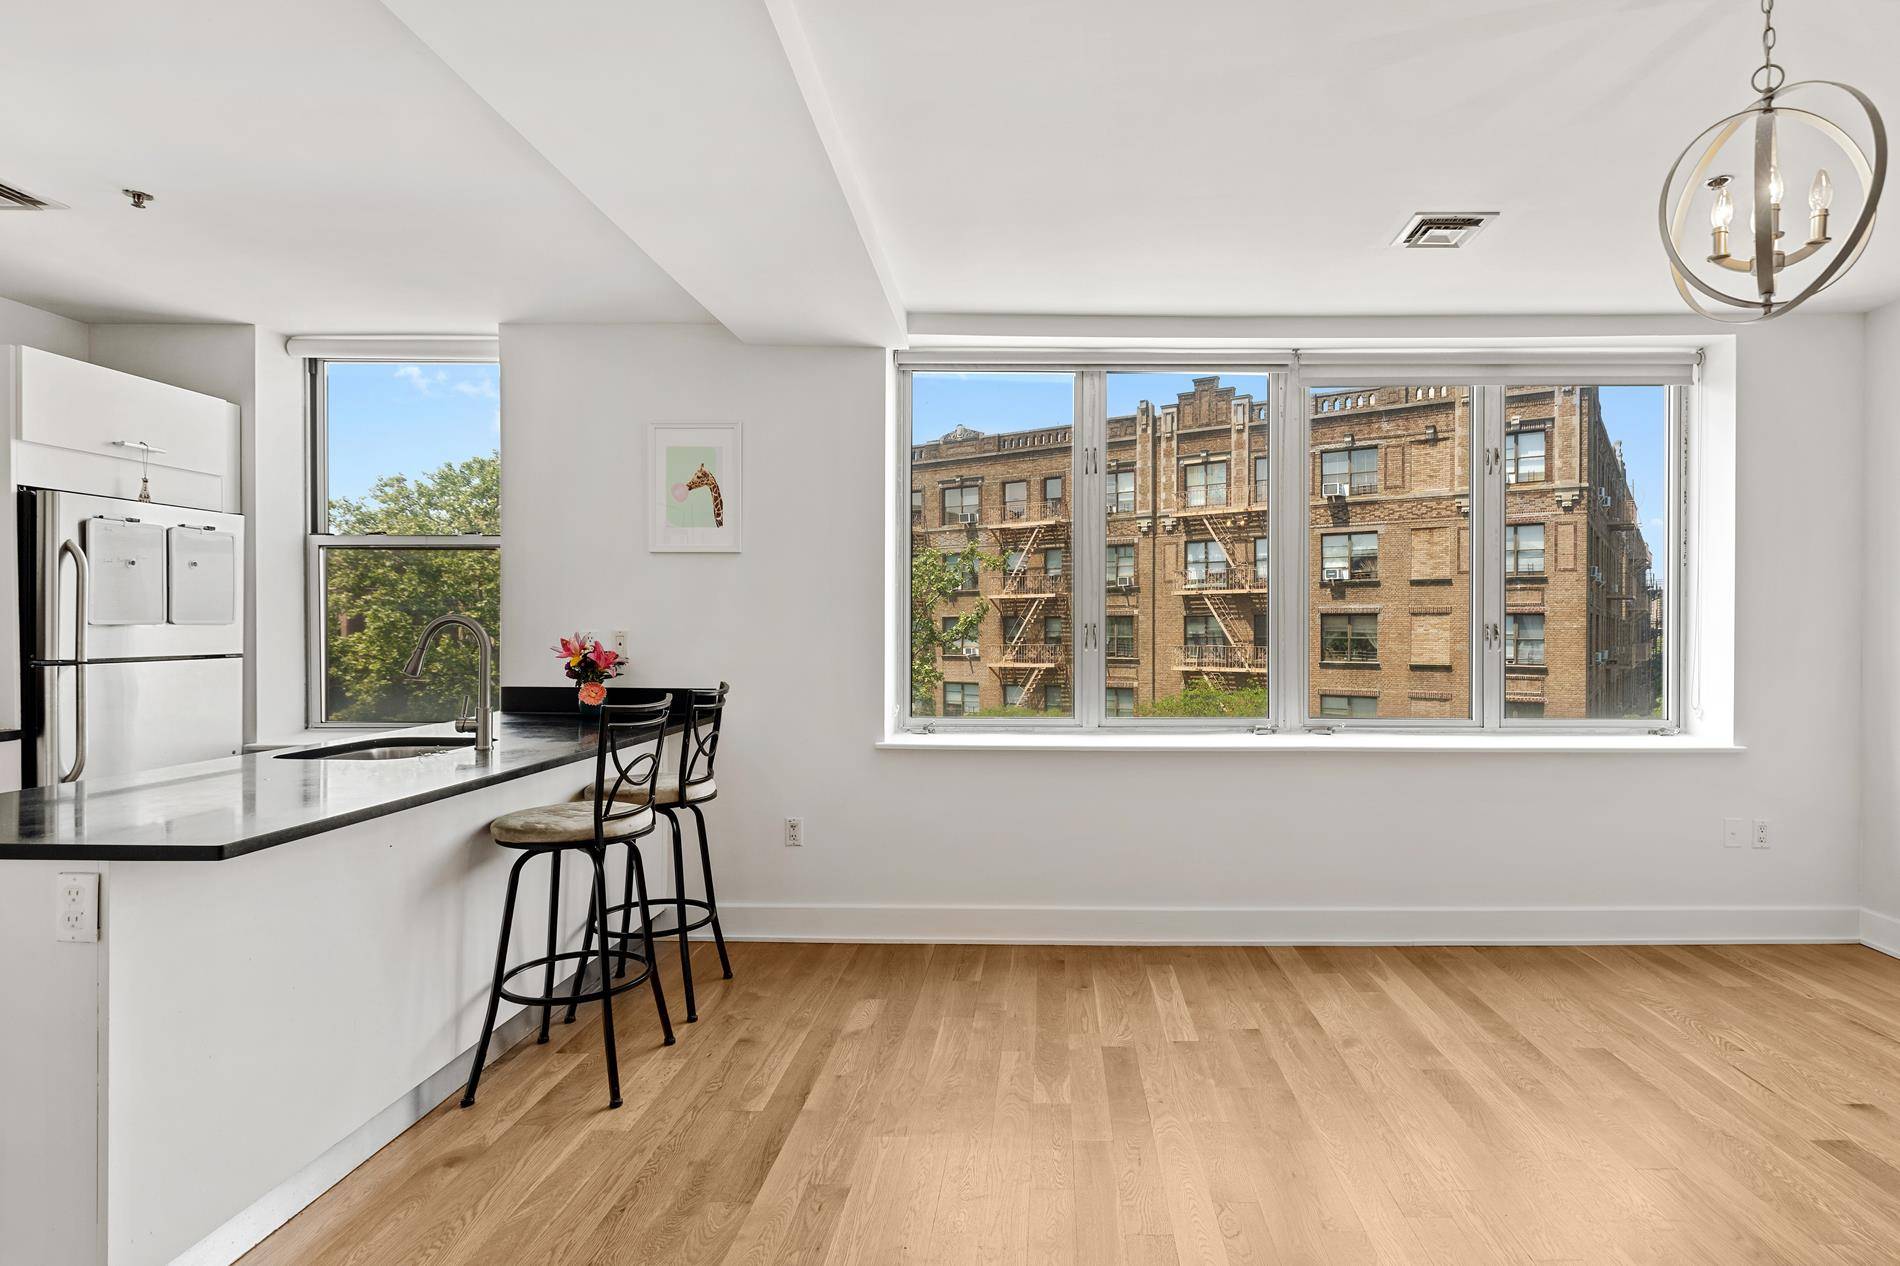 This rare 2 bedroom, 2. 5 bath duplex condo is located in the heart of South Williamsburg near the J, M, Z and L Trains.